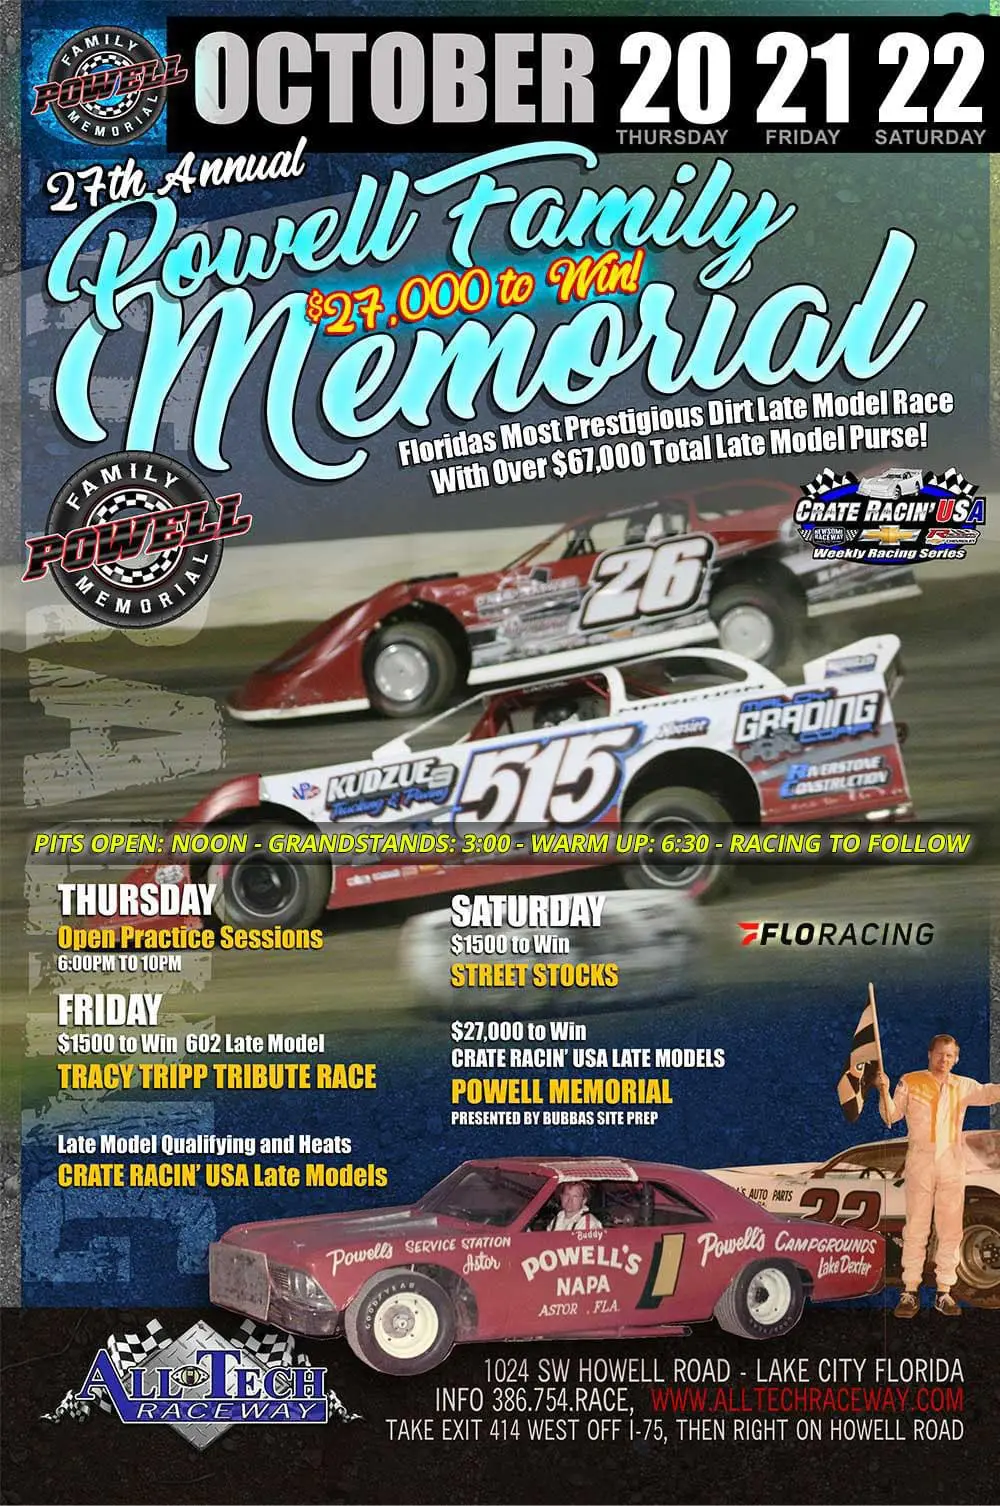 27th Powell Family Memorial “Florida’s Crown Jewel Dirt Late Model Event”